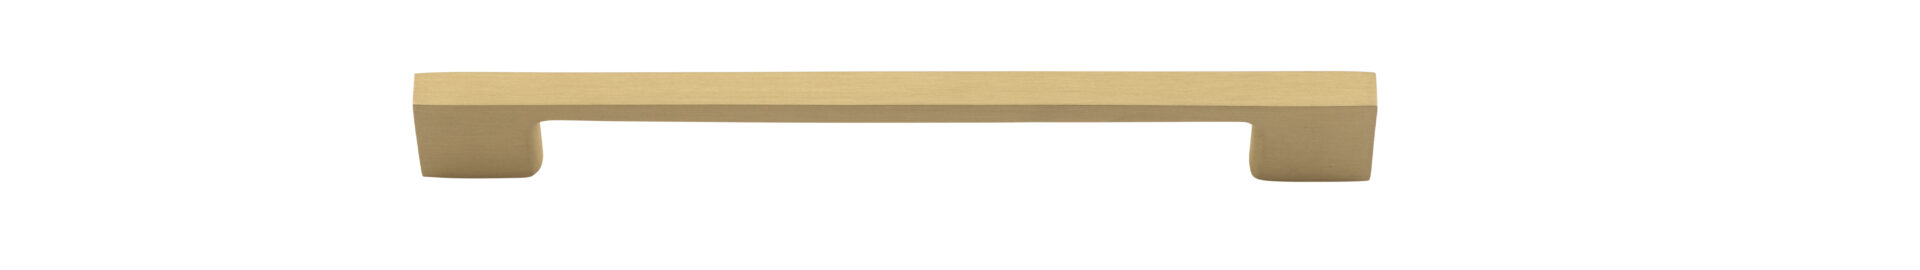 0556 - Cali Cabinet Pull - 160mm - Brushed Brass